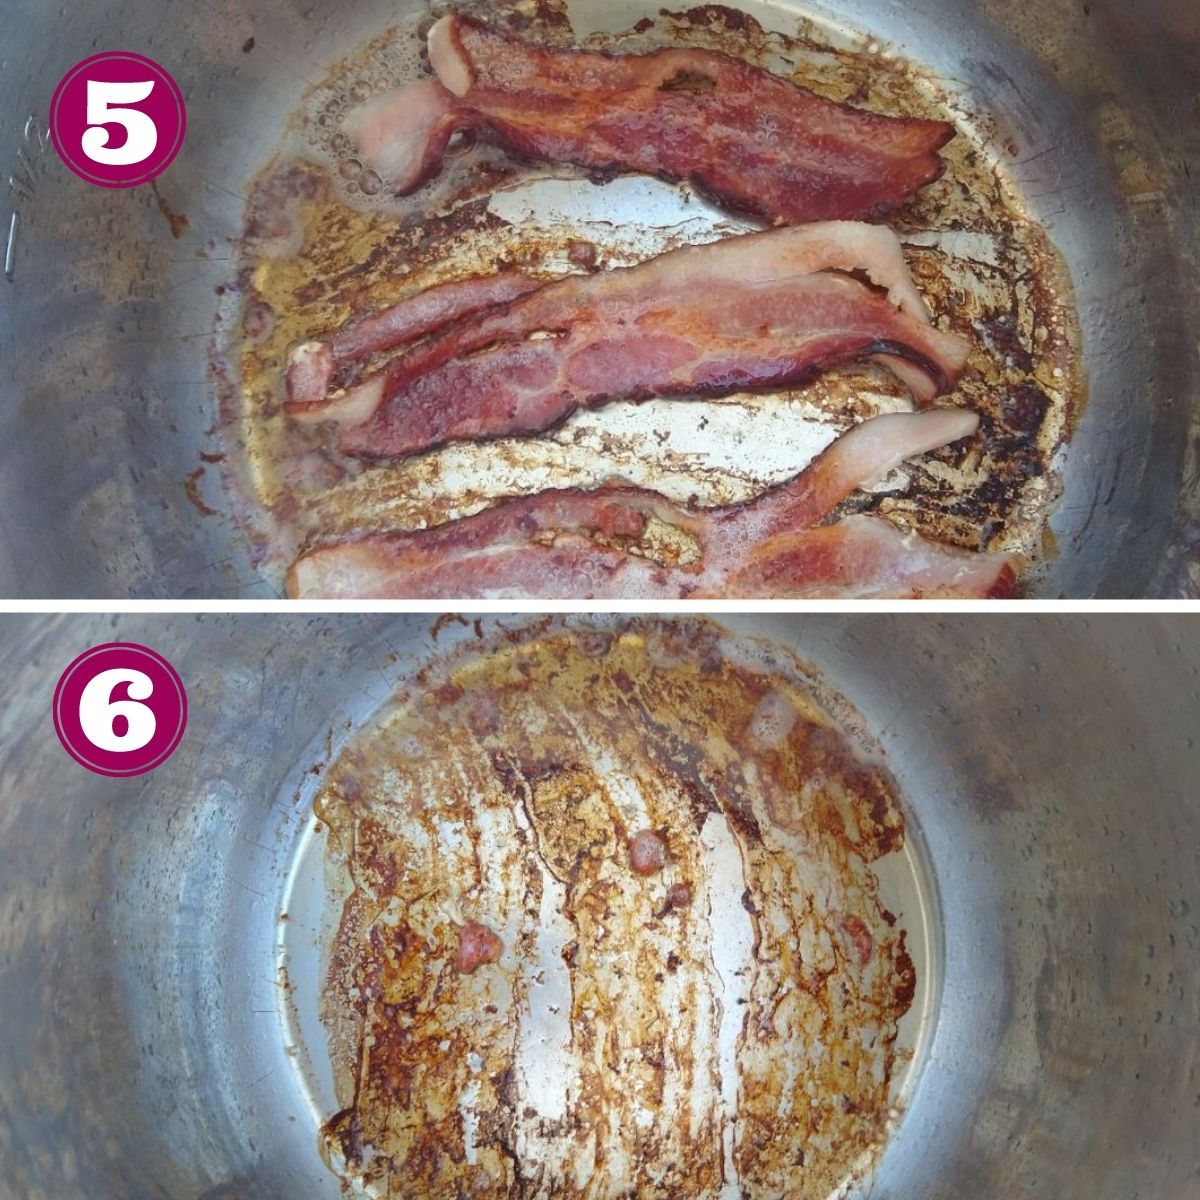 Step 5 shows the bacon nearly cooked in the bottom of the pot
Step 6 shows the bacon removed and brown stuff stuck on the bottom